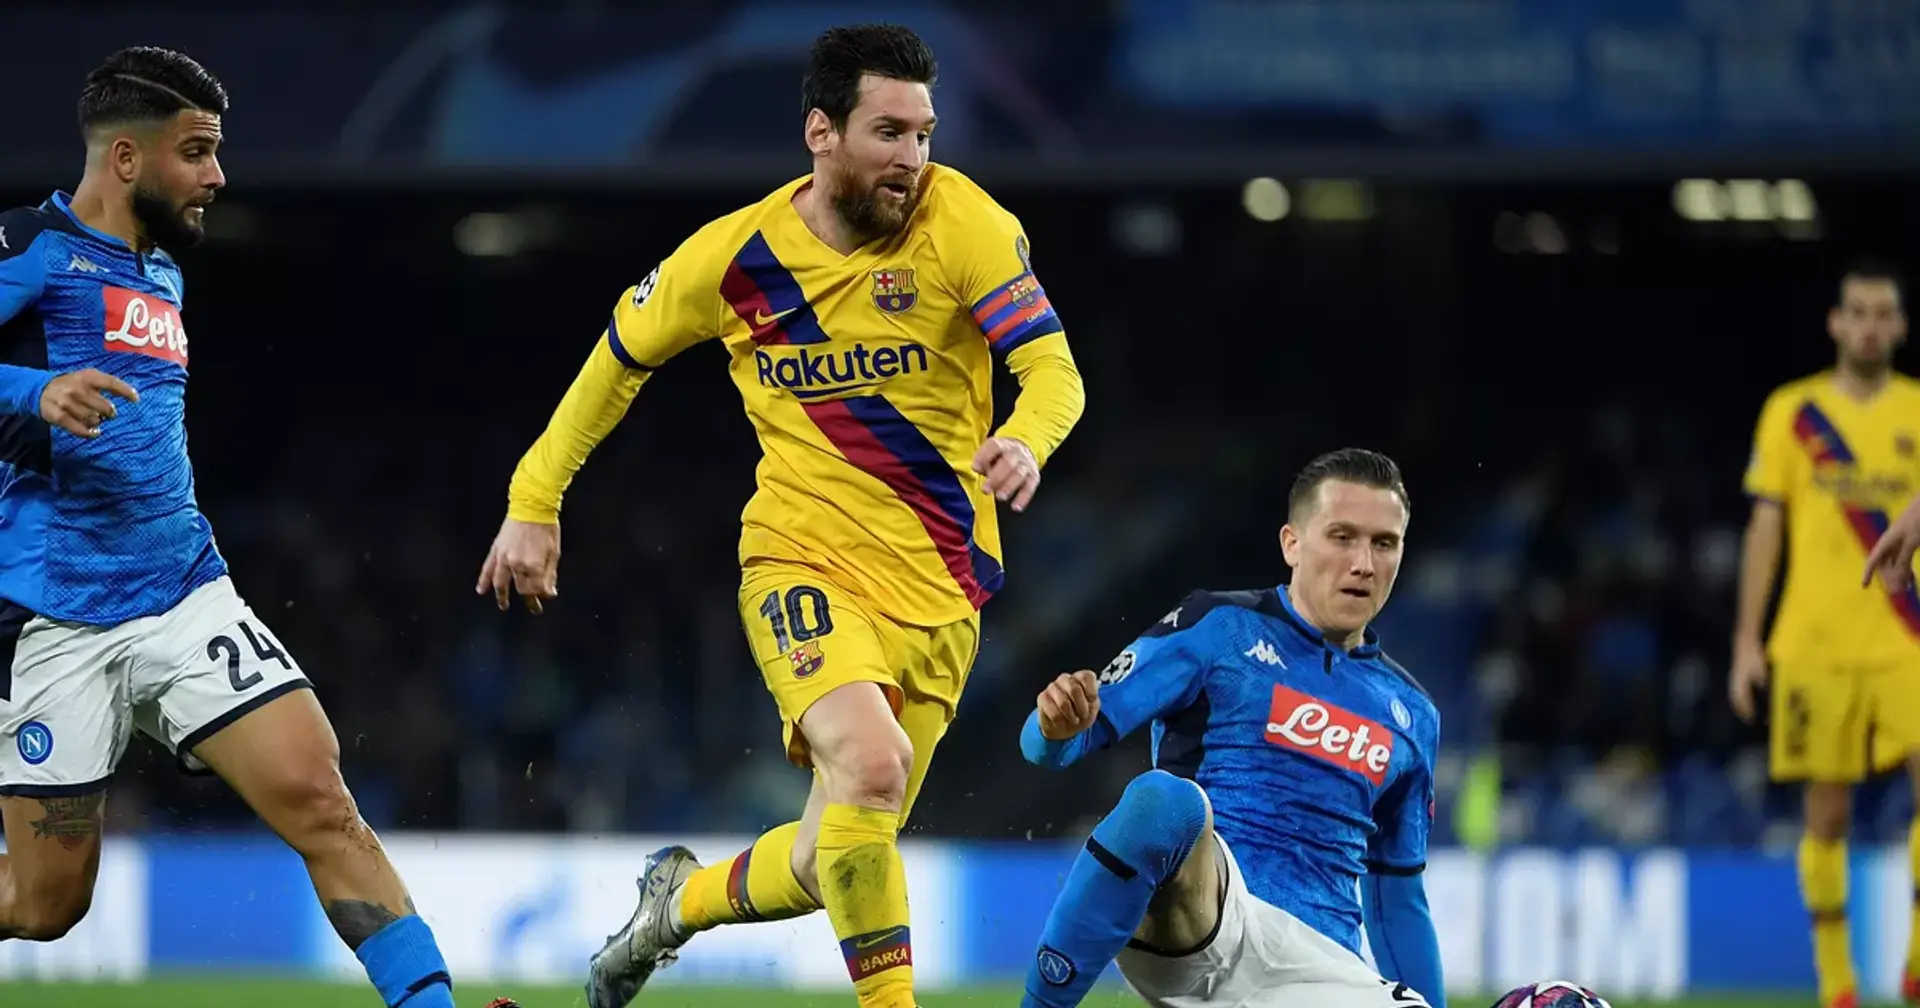 Dates and kick-off times for Barcelona's return leg against Napoli and quarter-final revealed